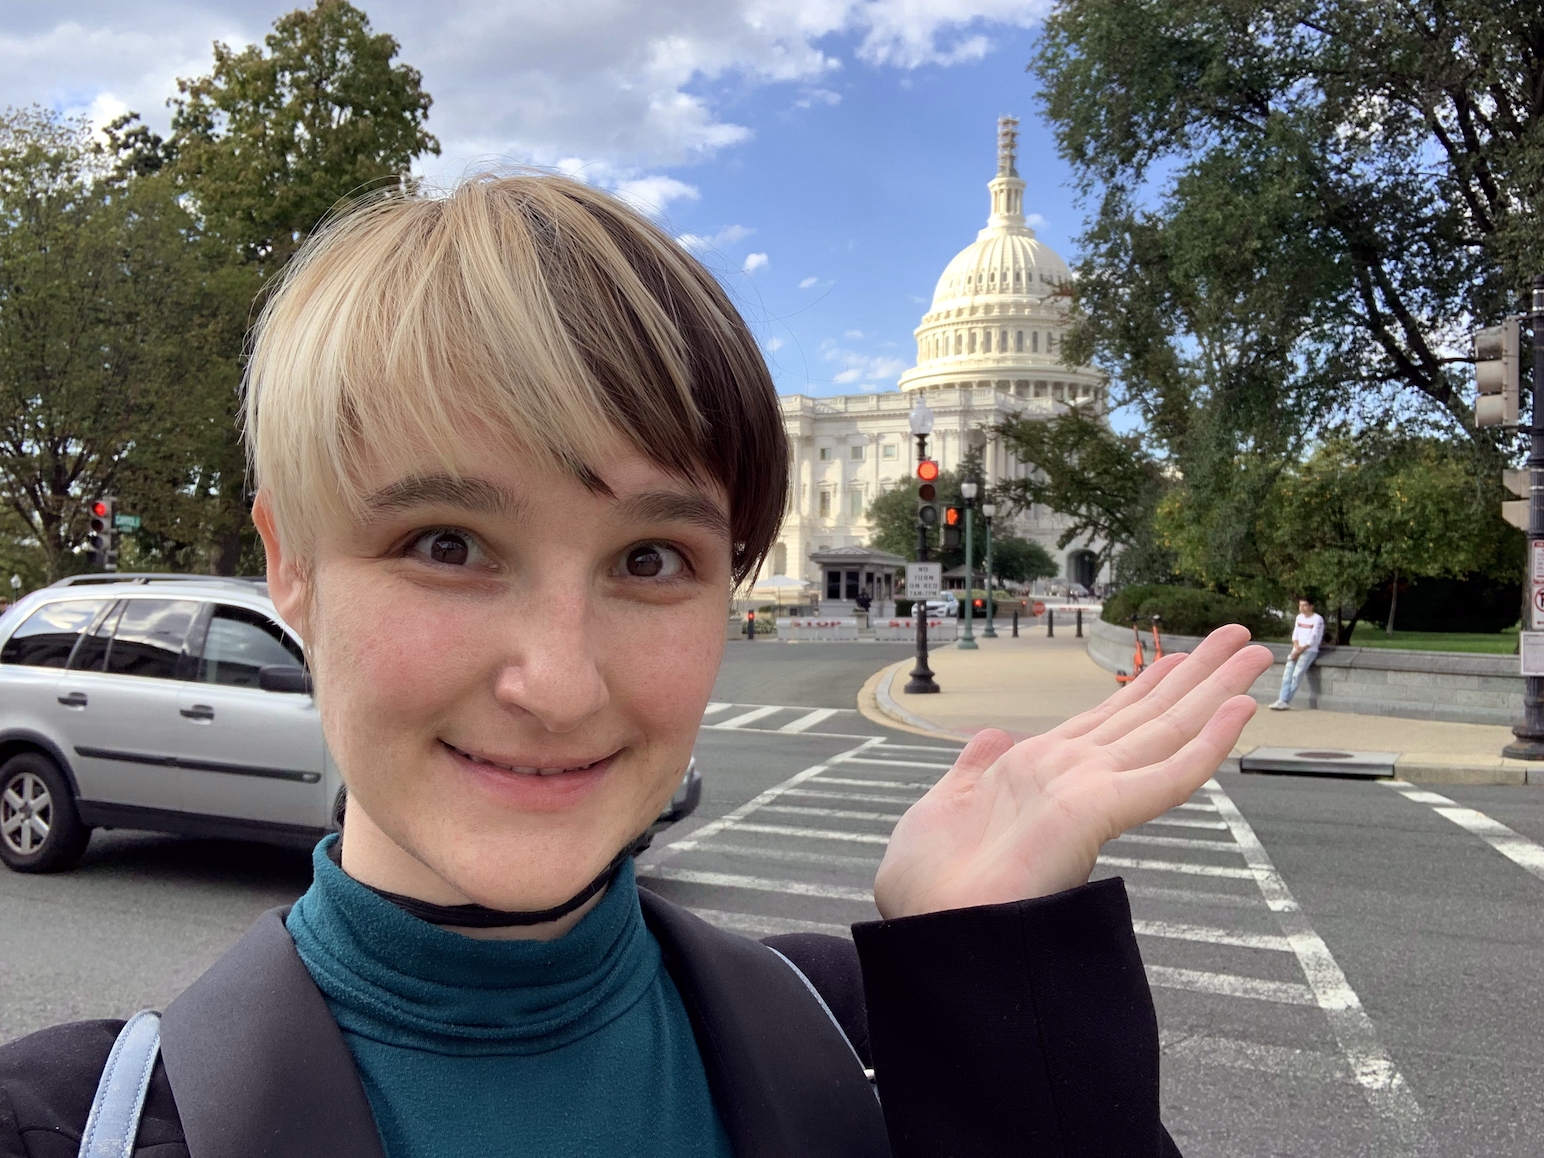 B stands in front of the US Capitol holding up a hand to gesture toward the iconic dome